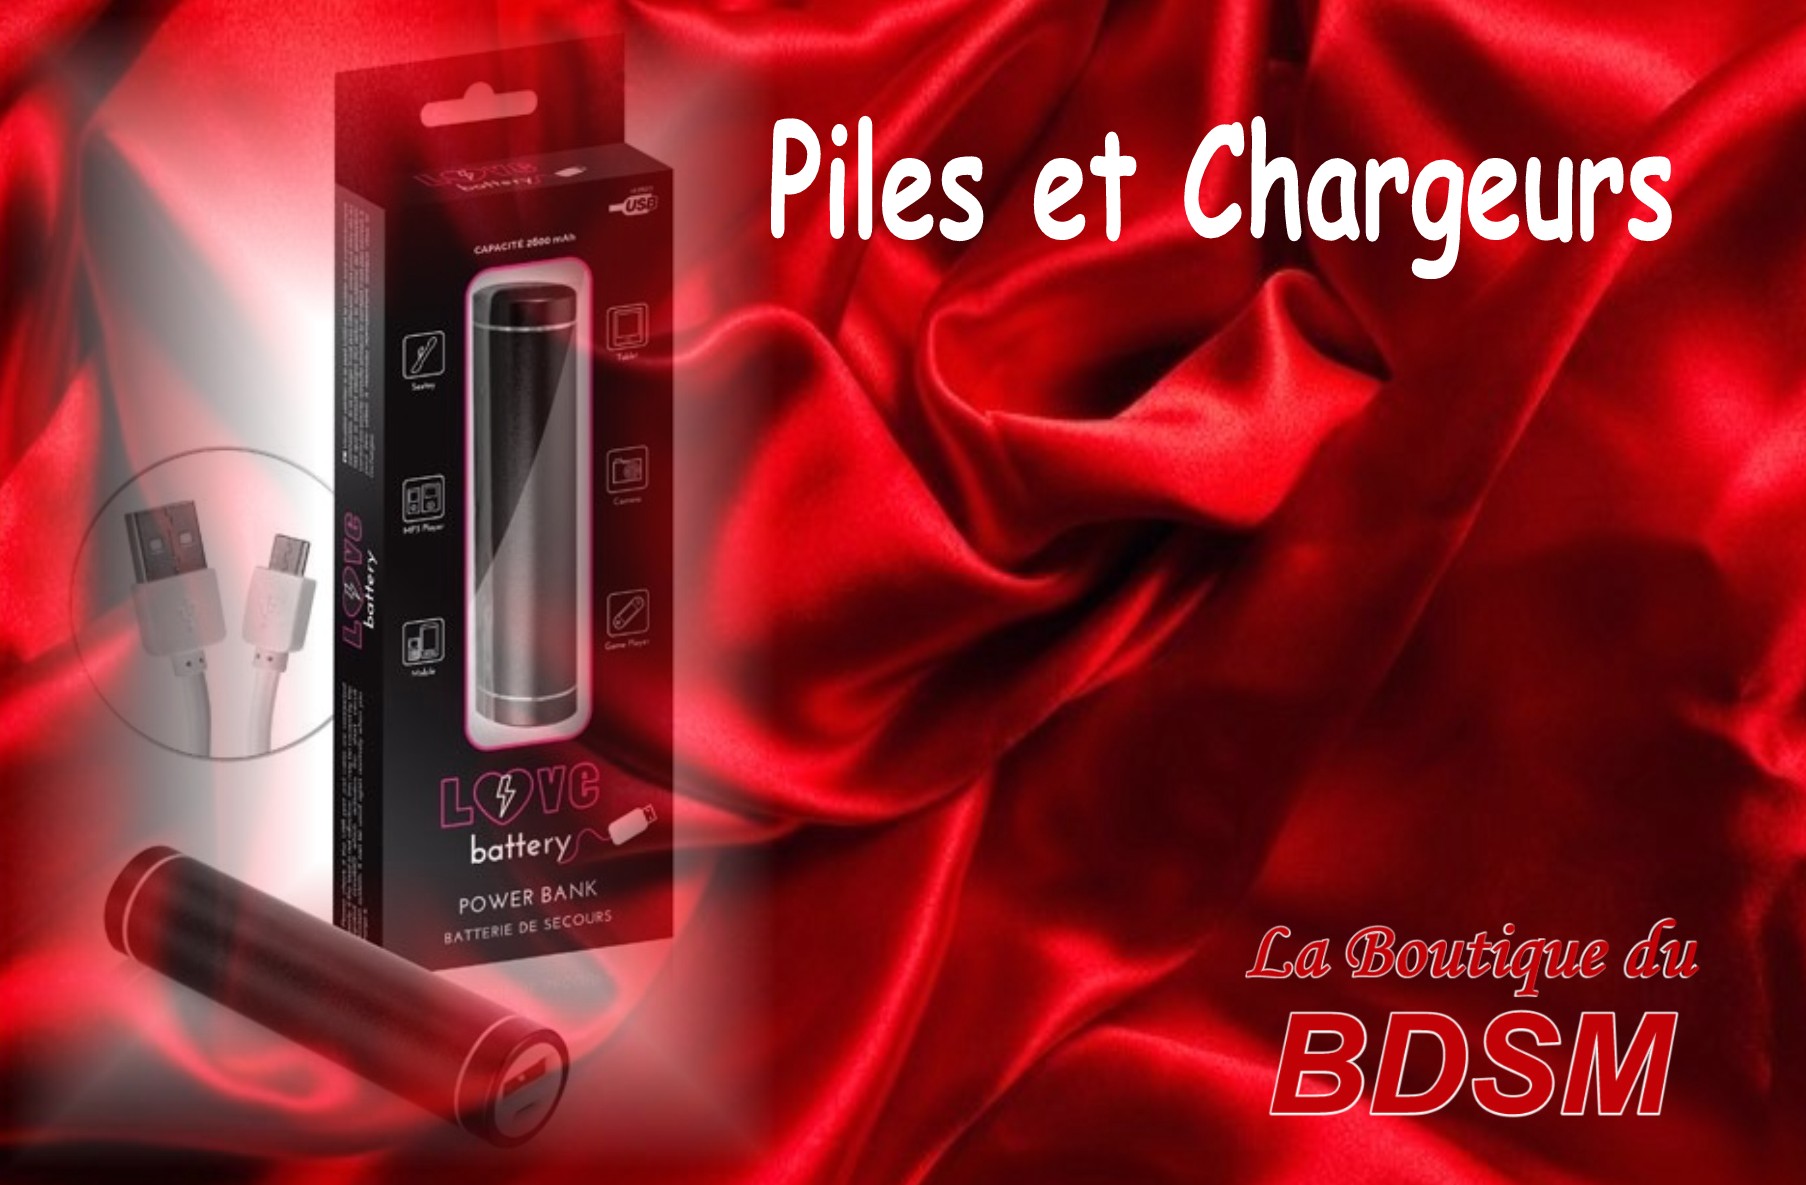 PILES ET CHARGEURS SEXTOYS BOURGNEUF 17